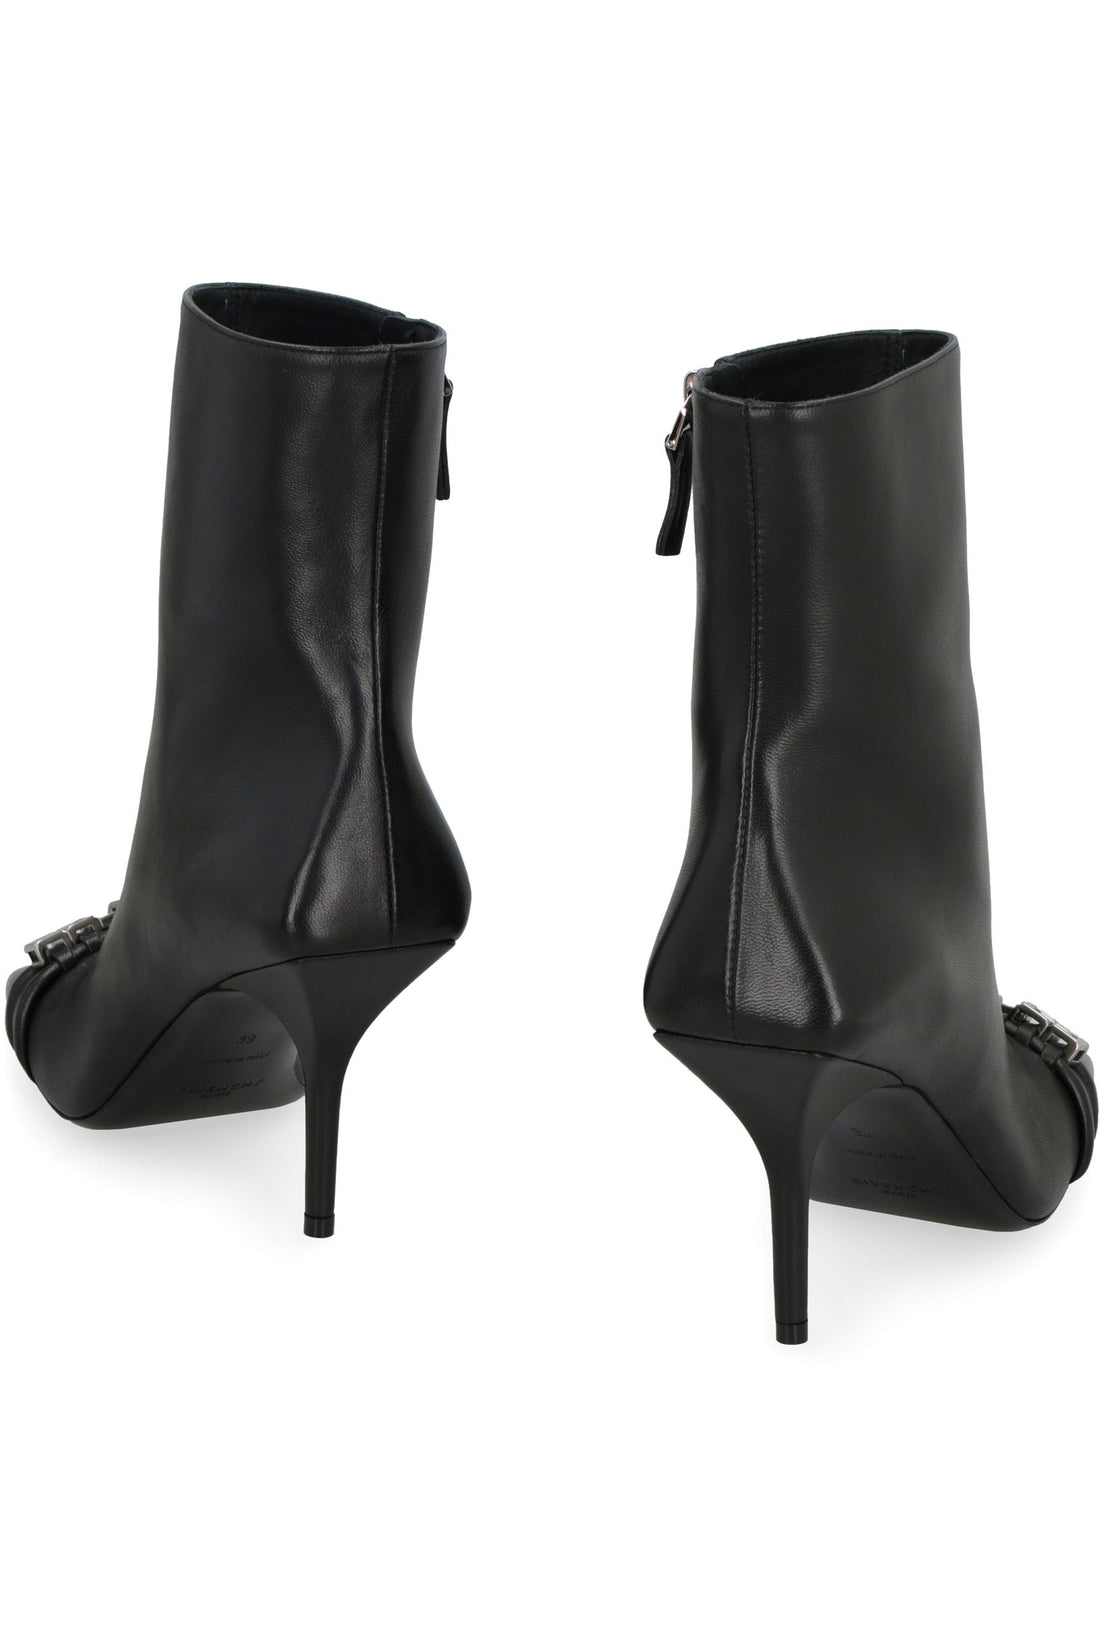 Givenchy-OUTLET-SALE-G Woven leather ankle boots-ARCHIVIST